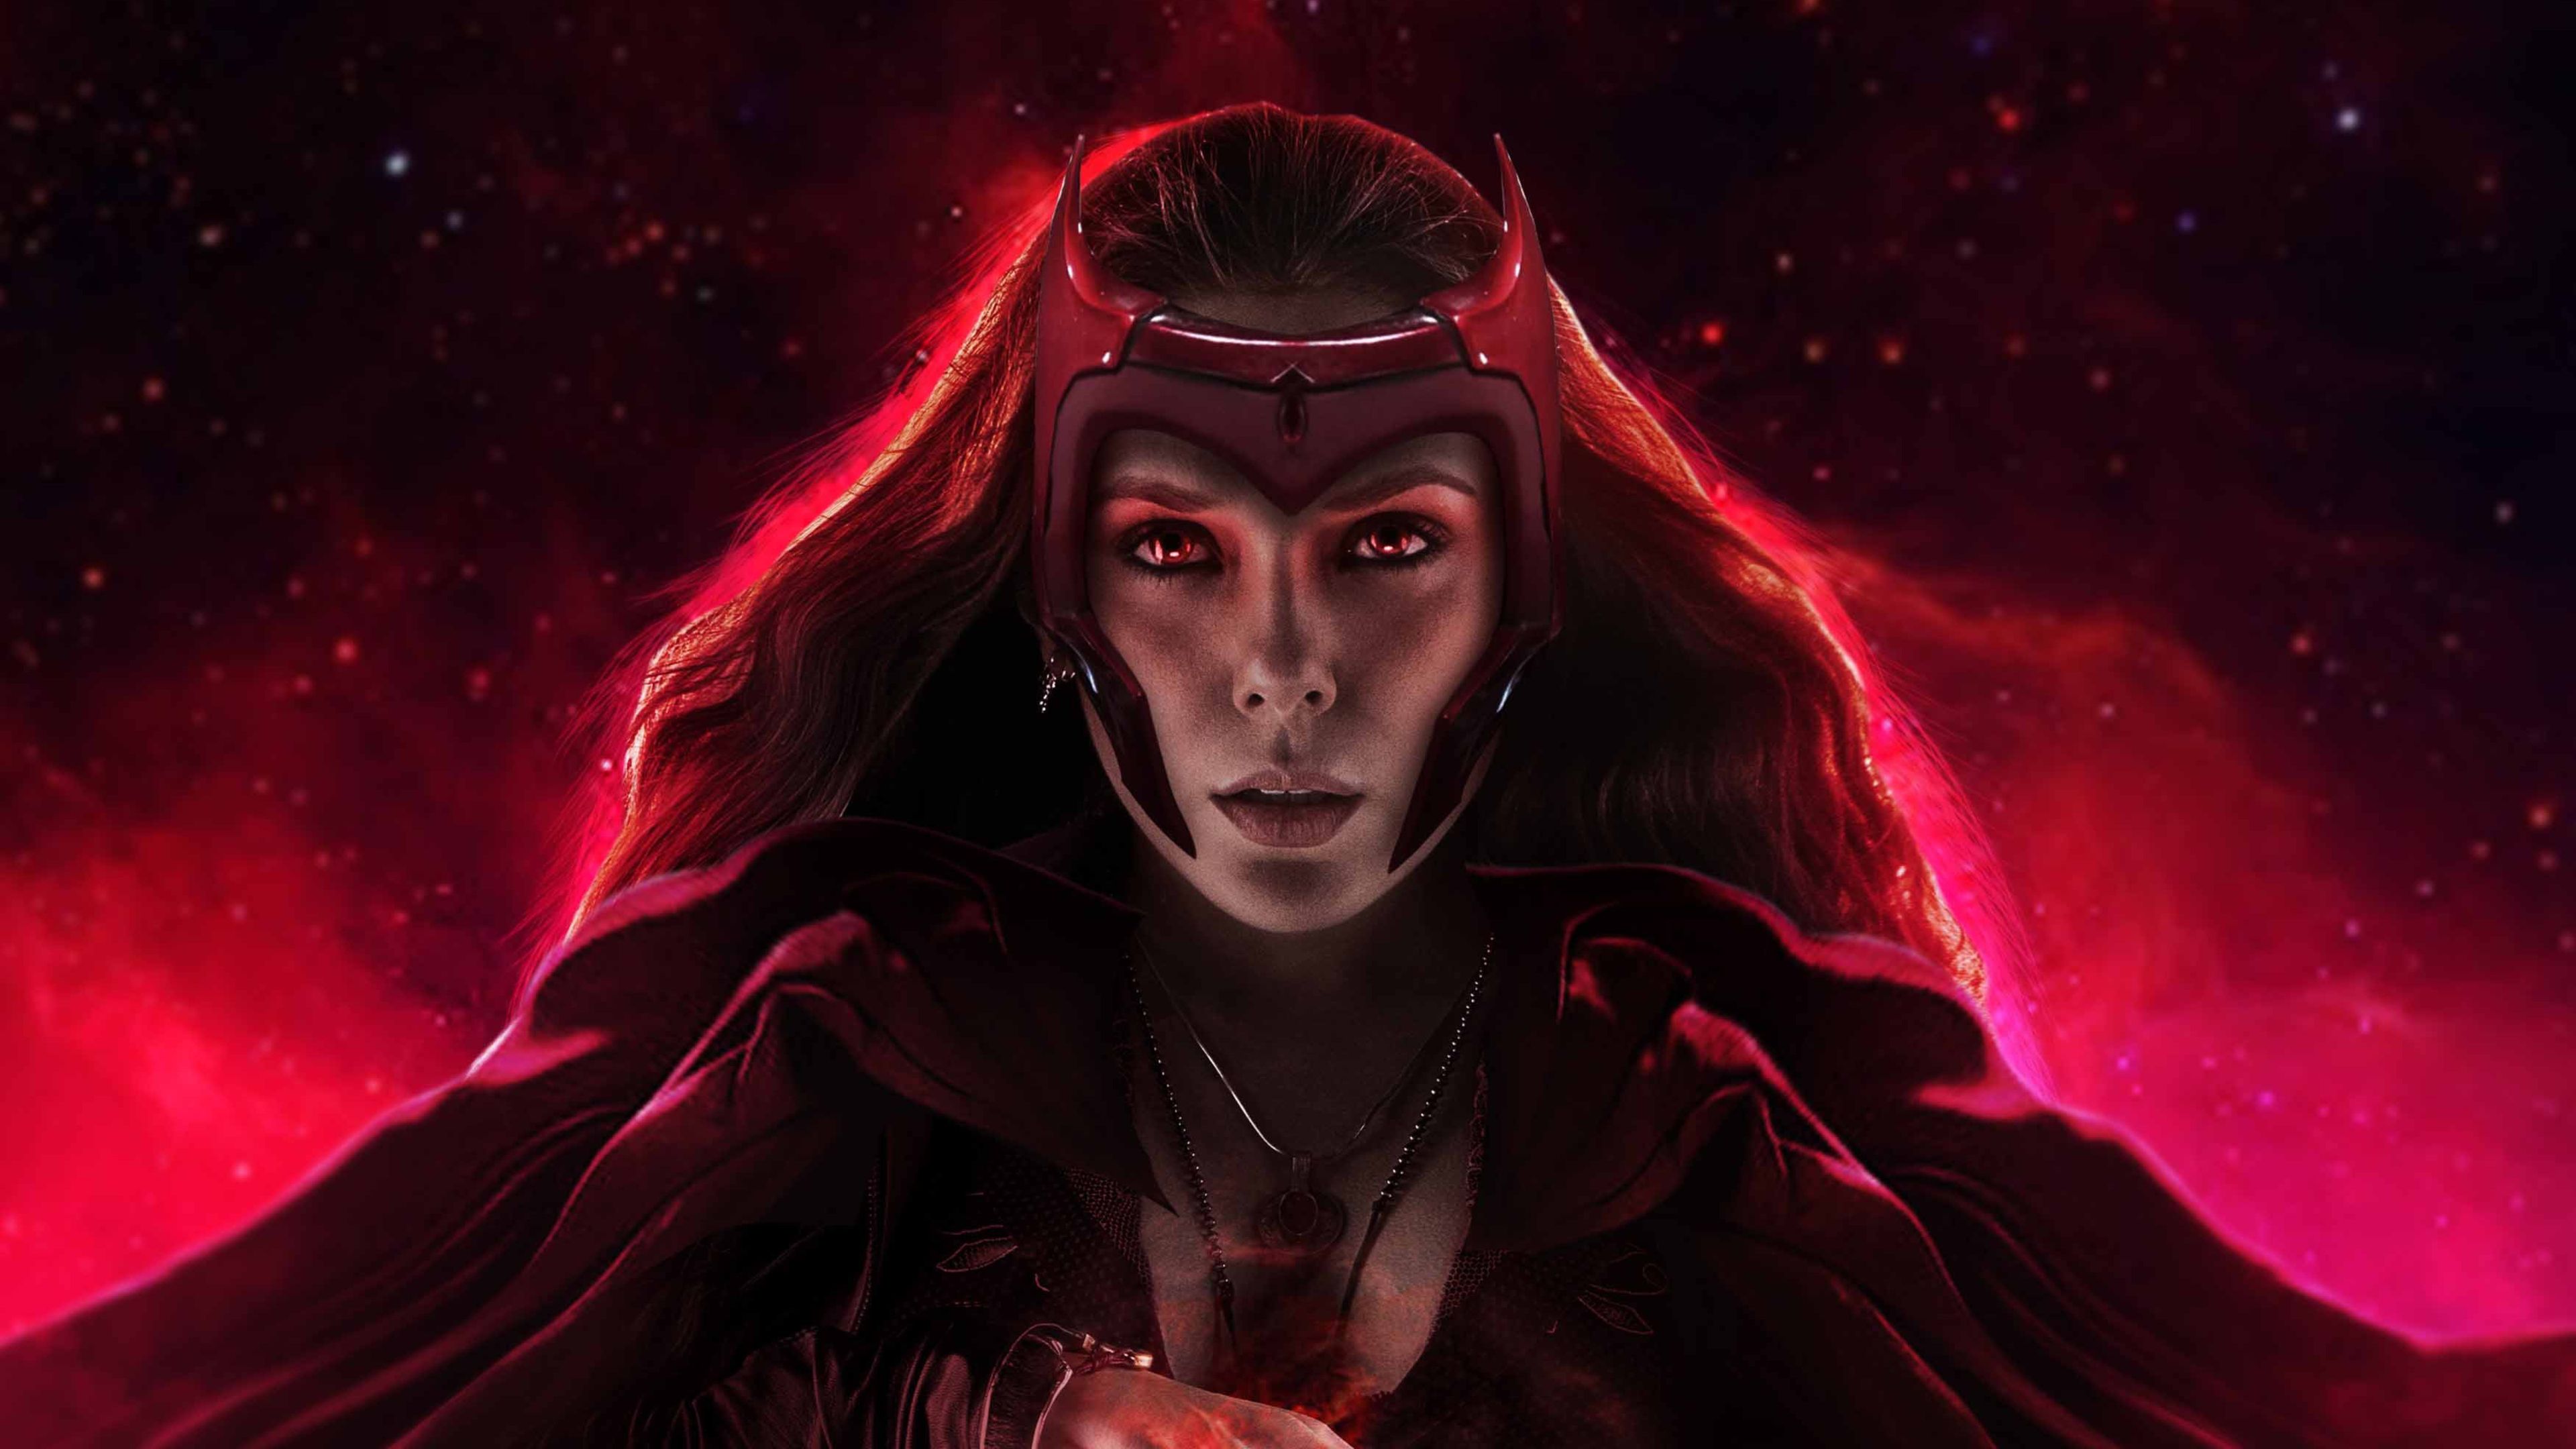 The Scarlet Witch 4K HD Superheroes Wallpaper